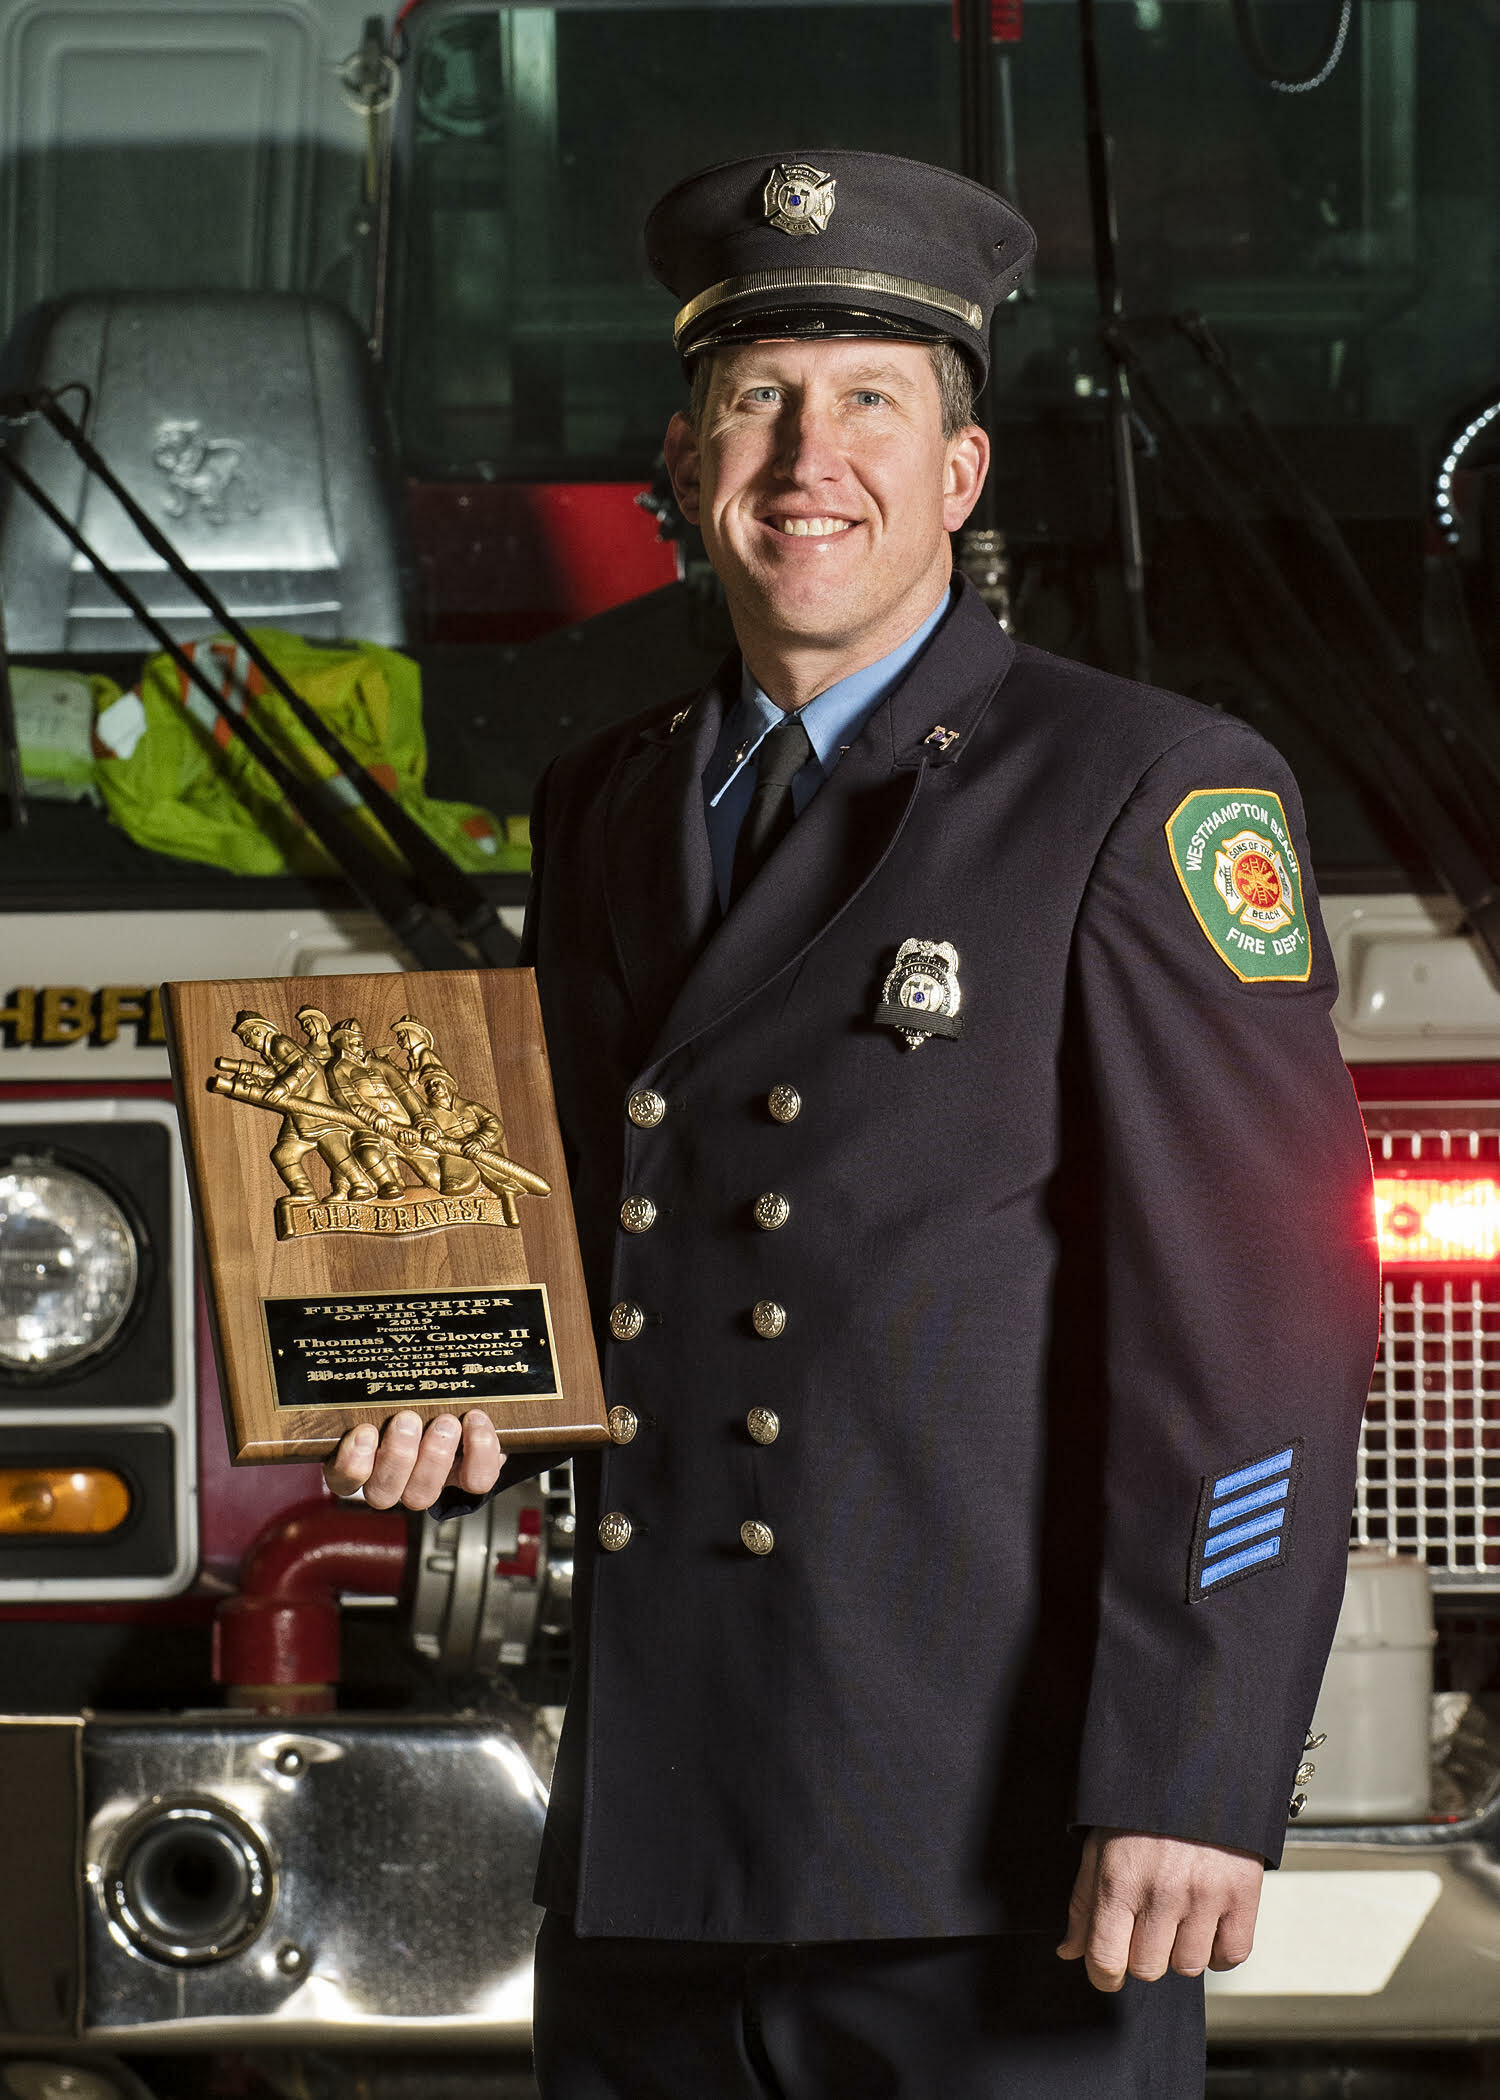 Firefighter of the Year, Ex-Captain Tom Glover.